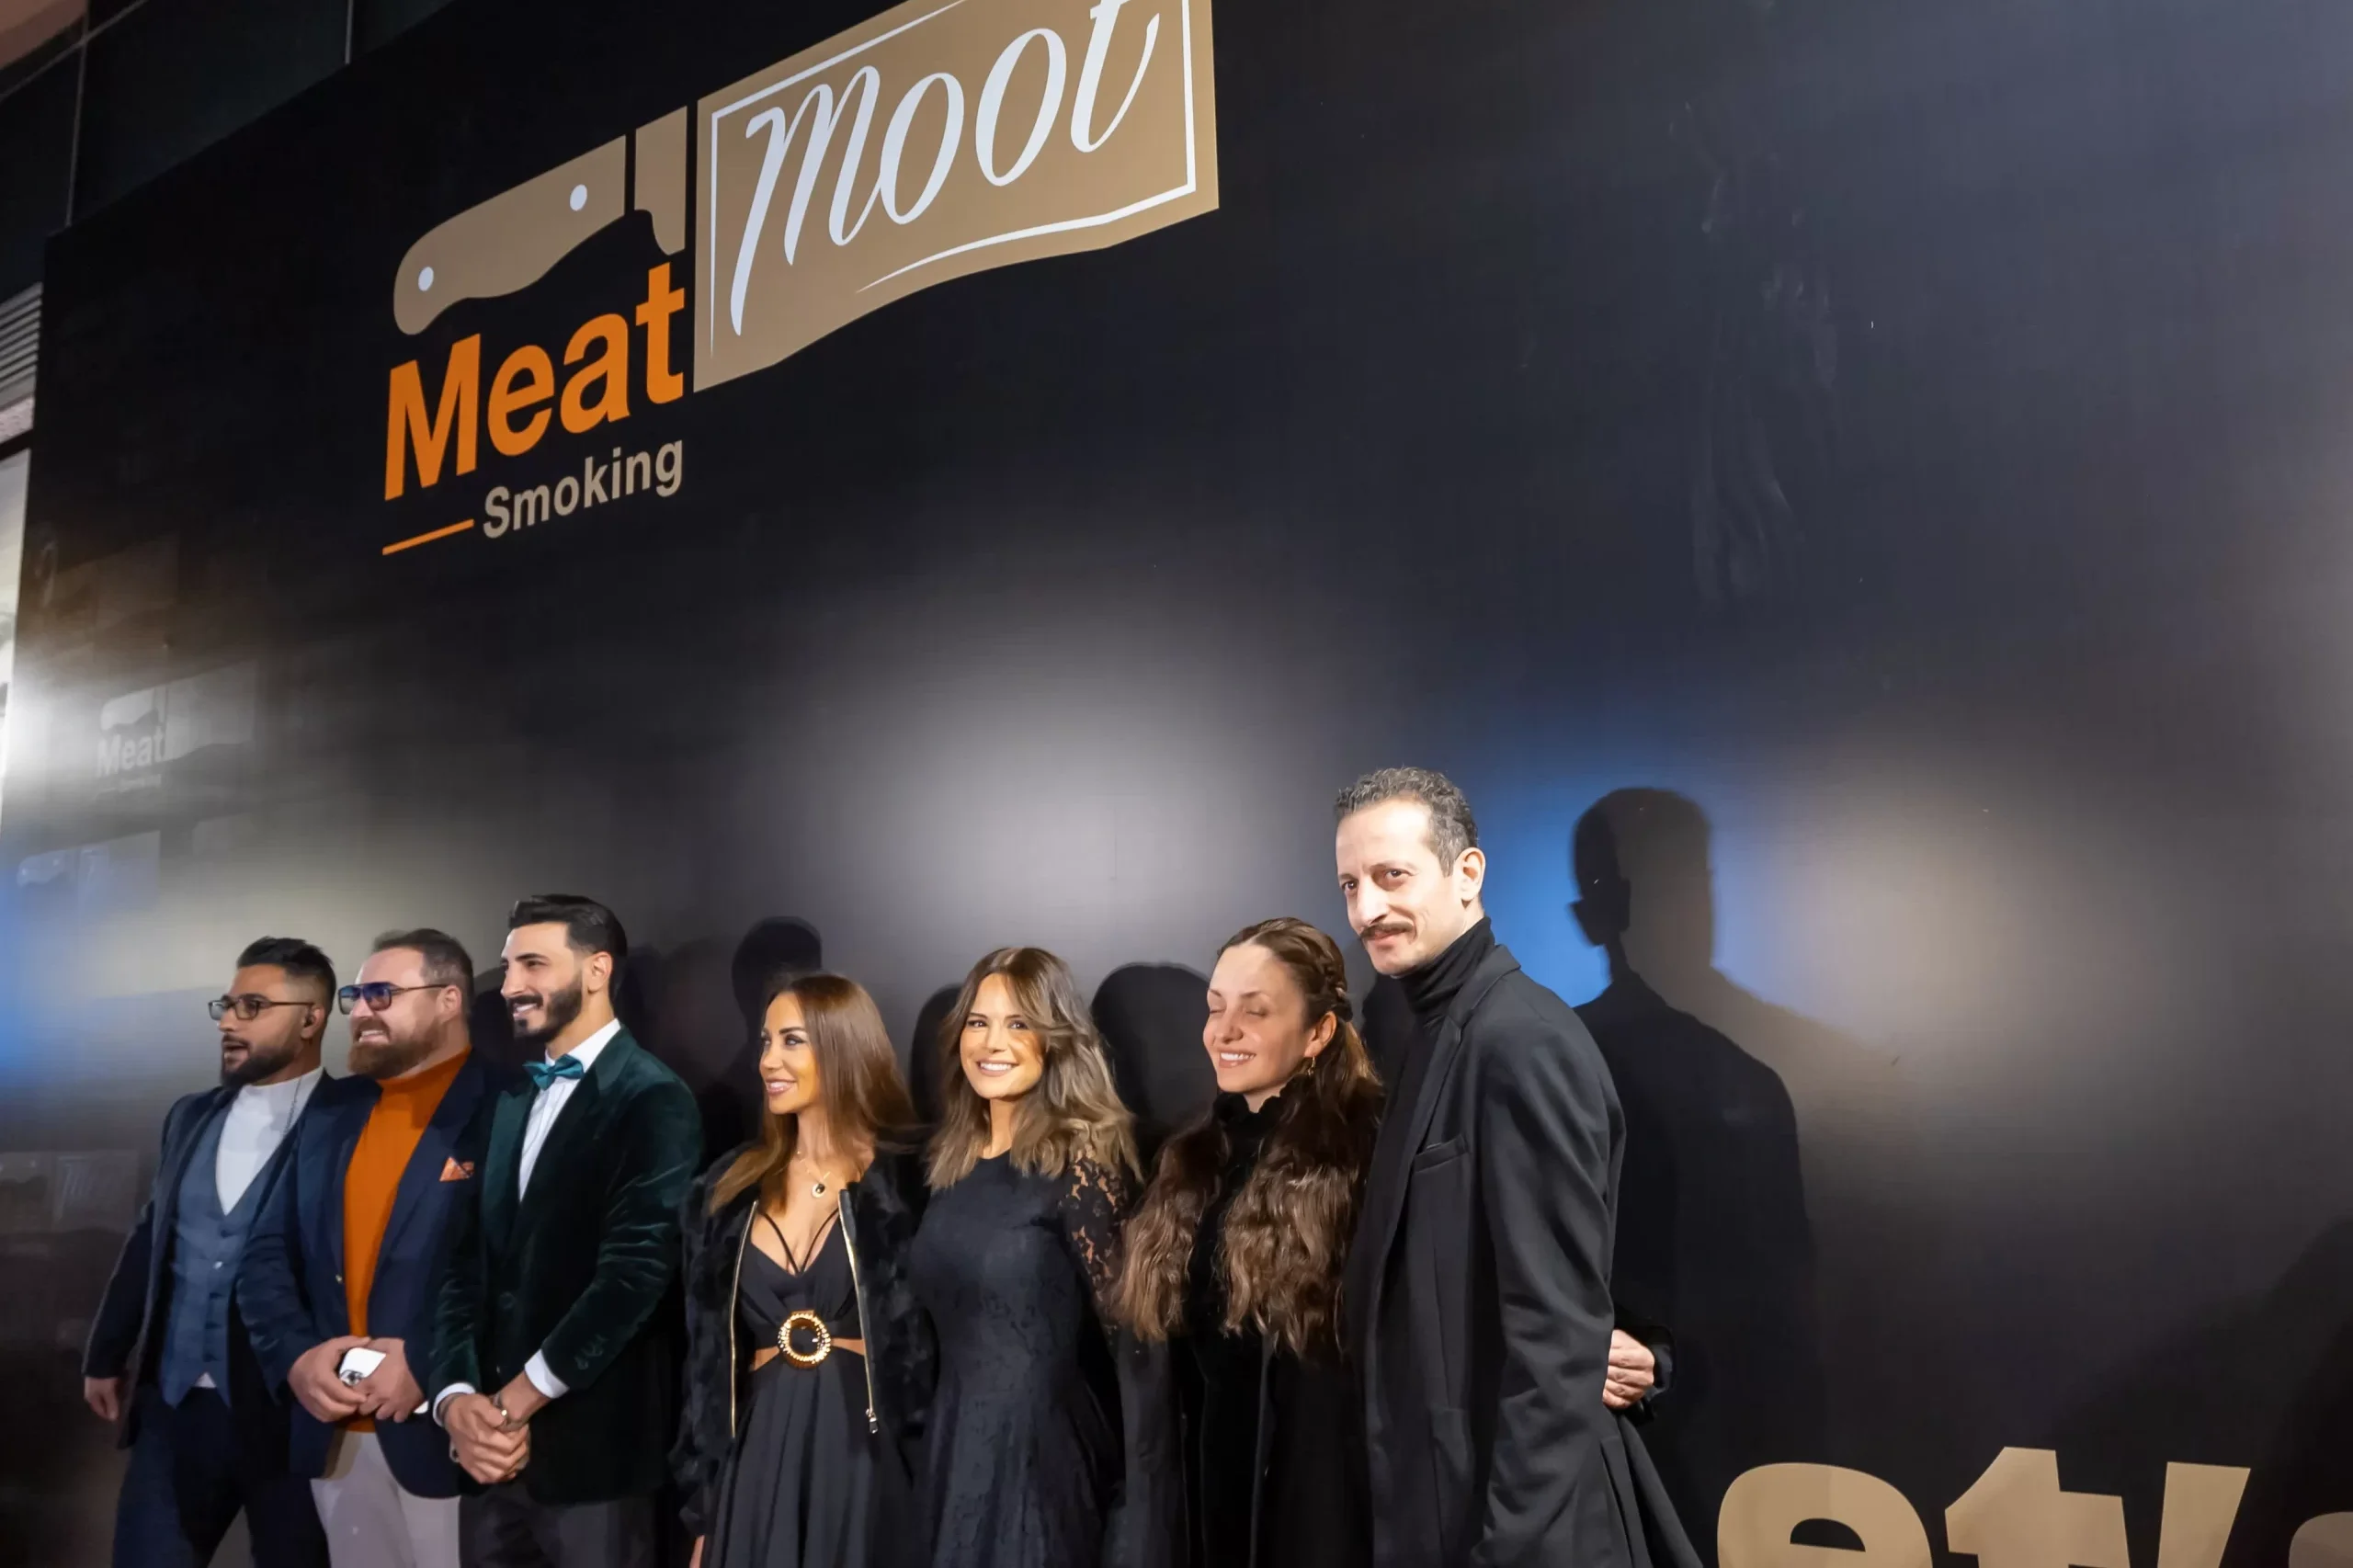 Grand Opening Ceremony - Branch in Vadi Istanbul Turkey - Wael Jassar Meat Moot Smoking - Meat Moot Vadistanbul, Best Restaurants in Istanbul with view - Restaurants in Vadi istanbul, best luxurious smoked meat restaurant in istanbul